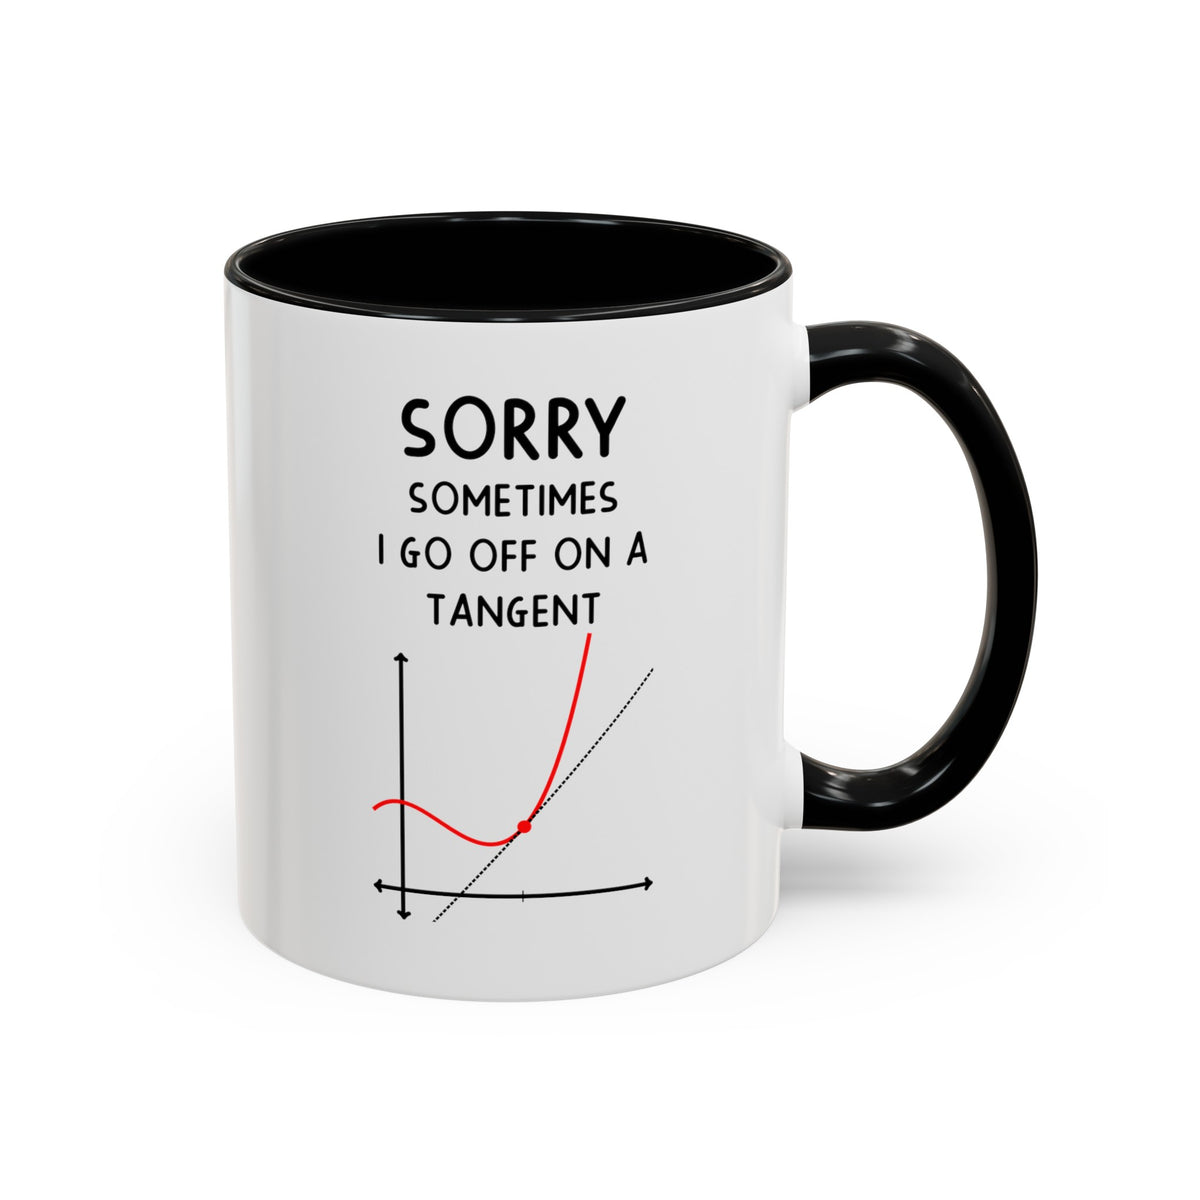 Funny Engineer Two Tone Mug, Sorry Sometimes I Go Off On A Tangent, Best For Engineering Student, Computer Chemical Engineer, Men Women